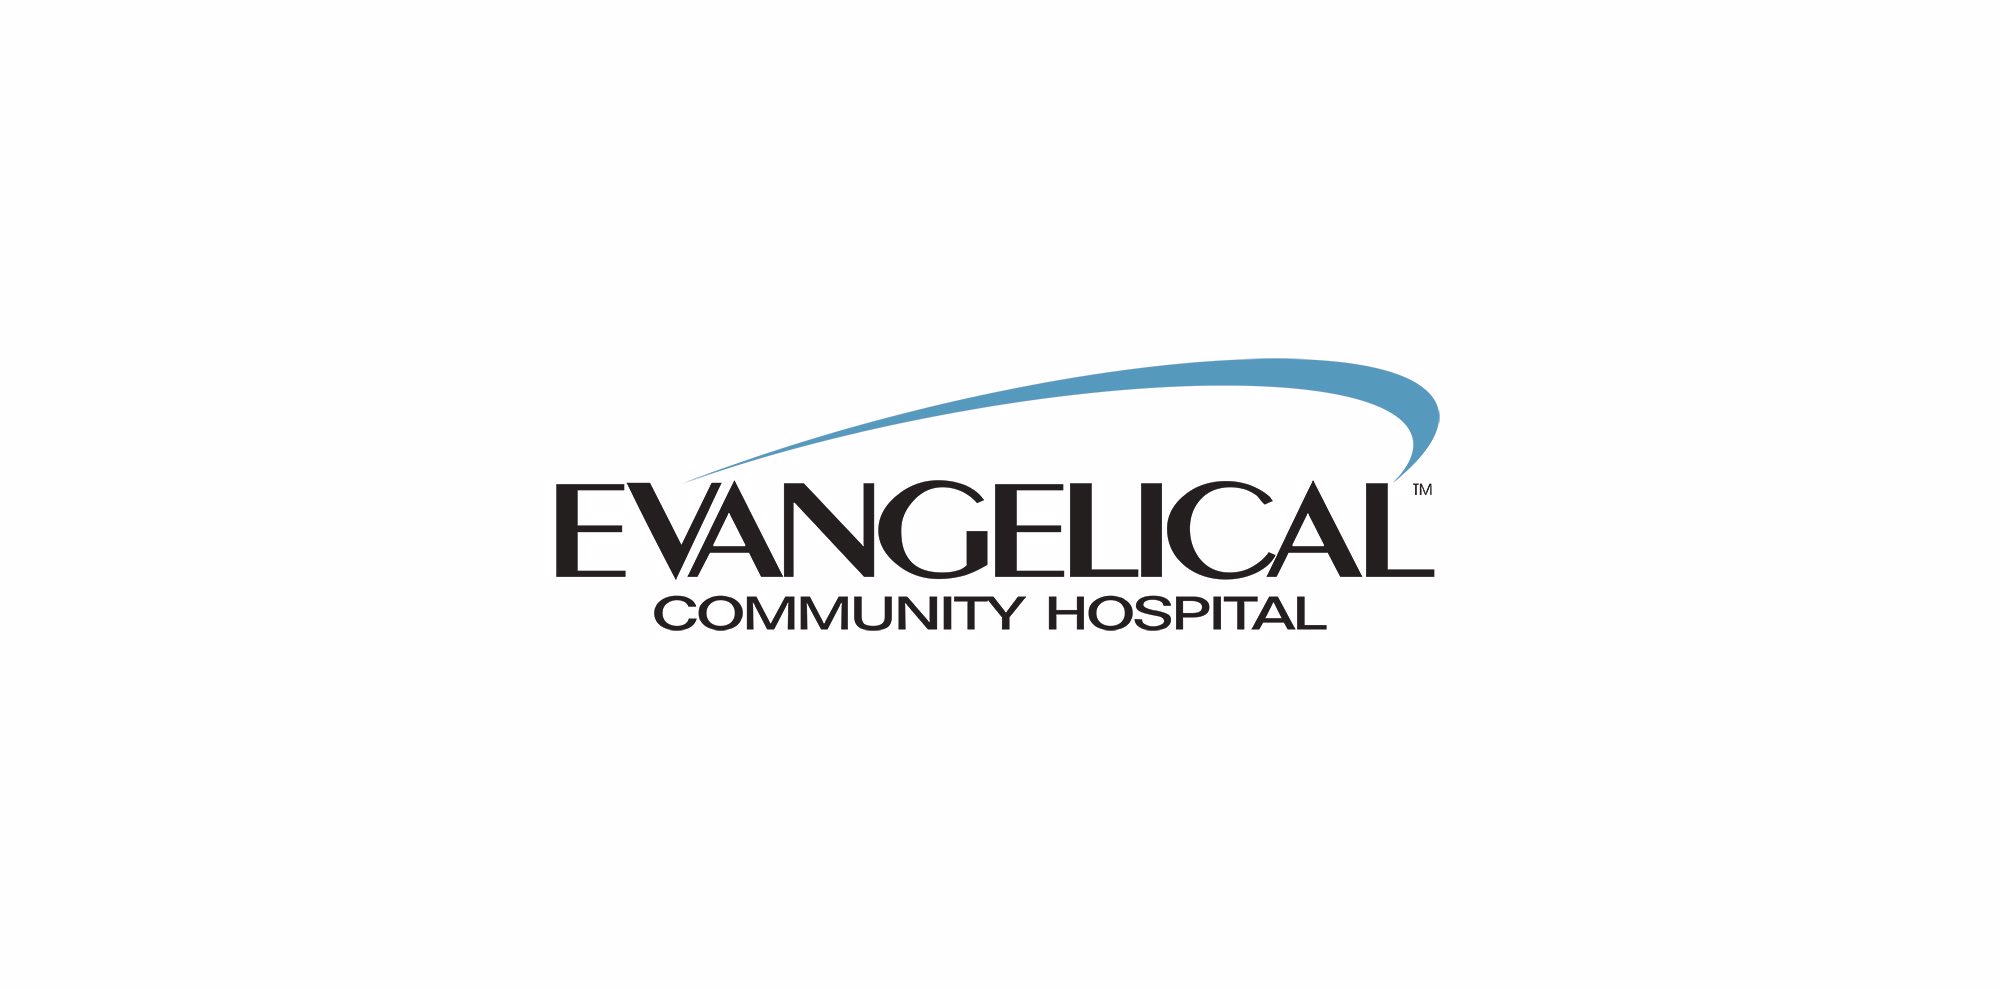 Evangelical Community Hospital Moves to New Electronic Health Record to Advance Patient Care